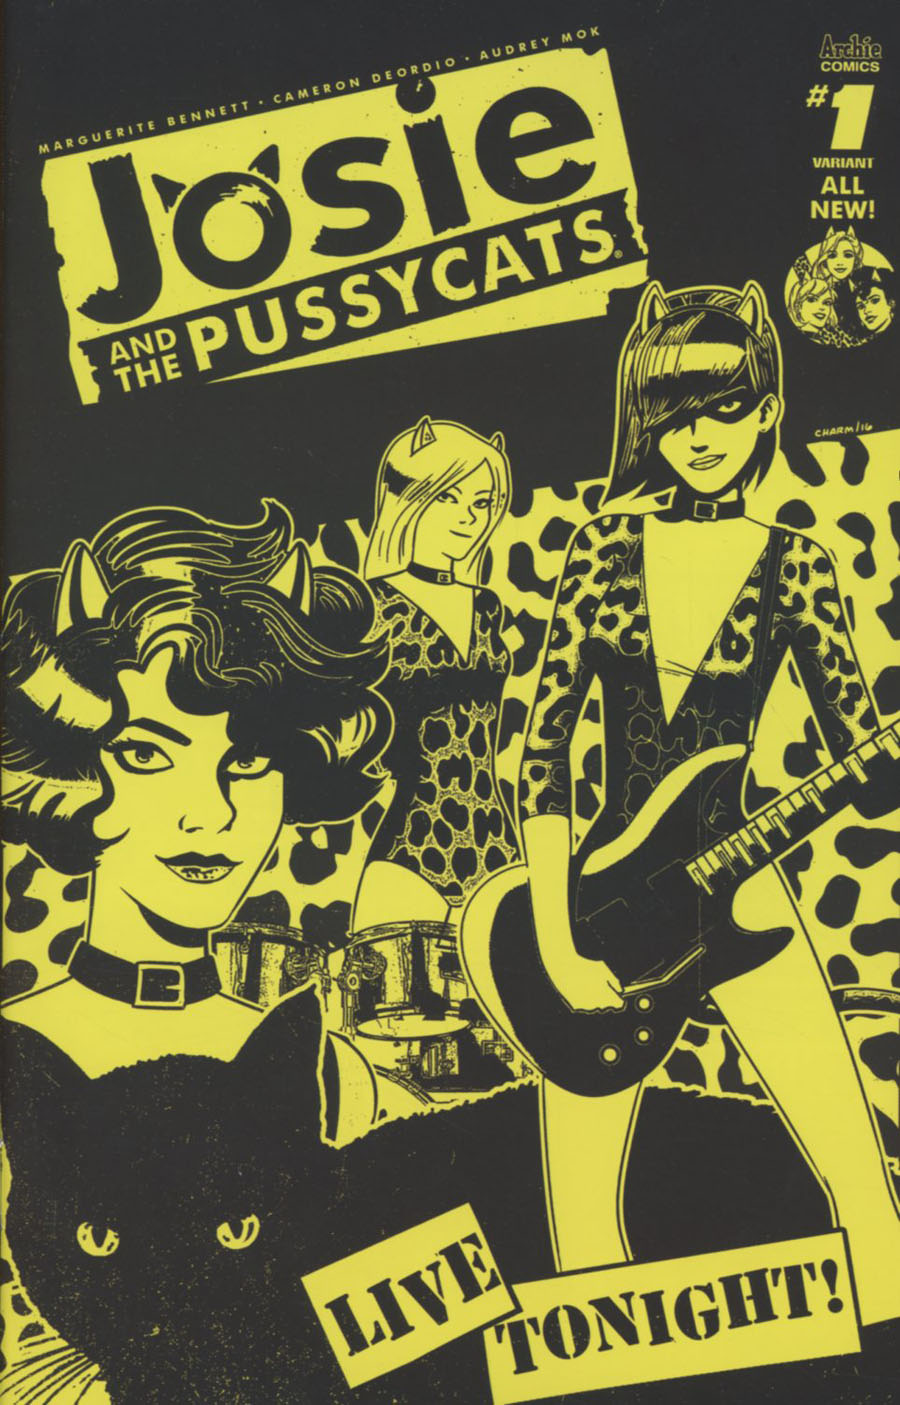 Josie And The Pussycats Vol 2 #1 Cover B Variant Derek Charm Cover